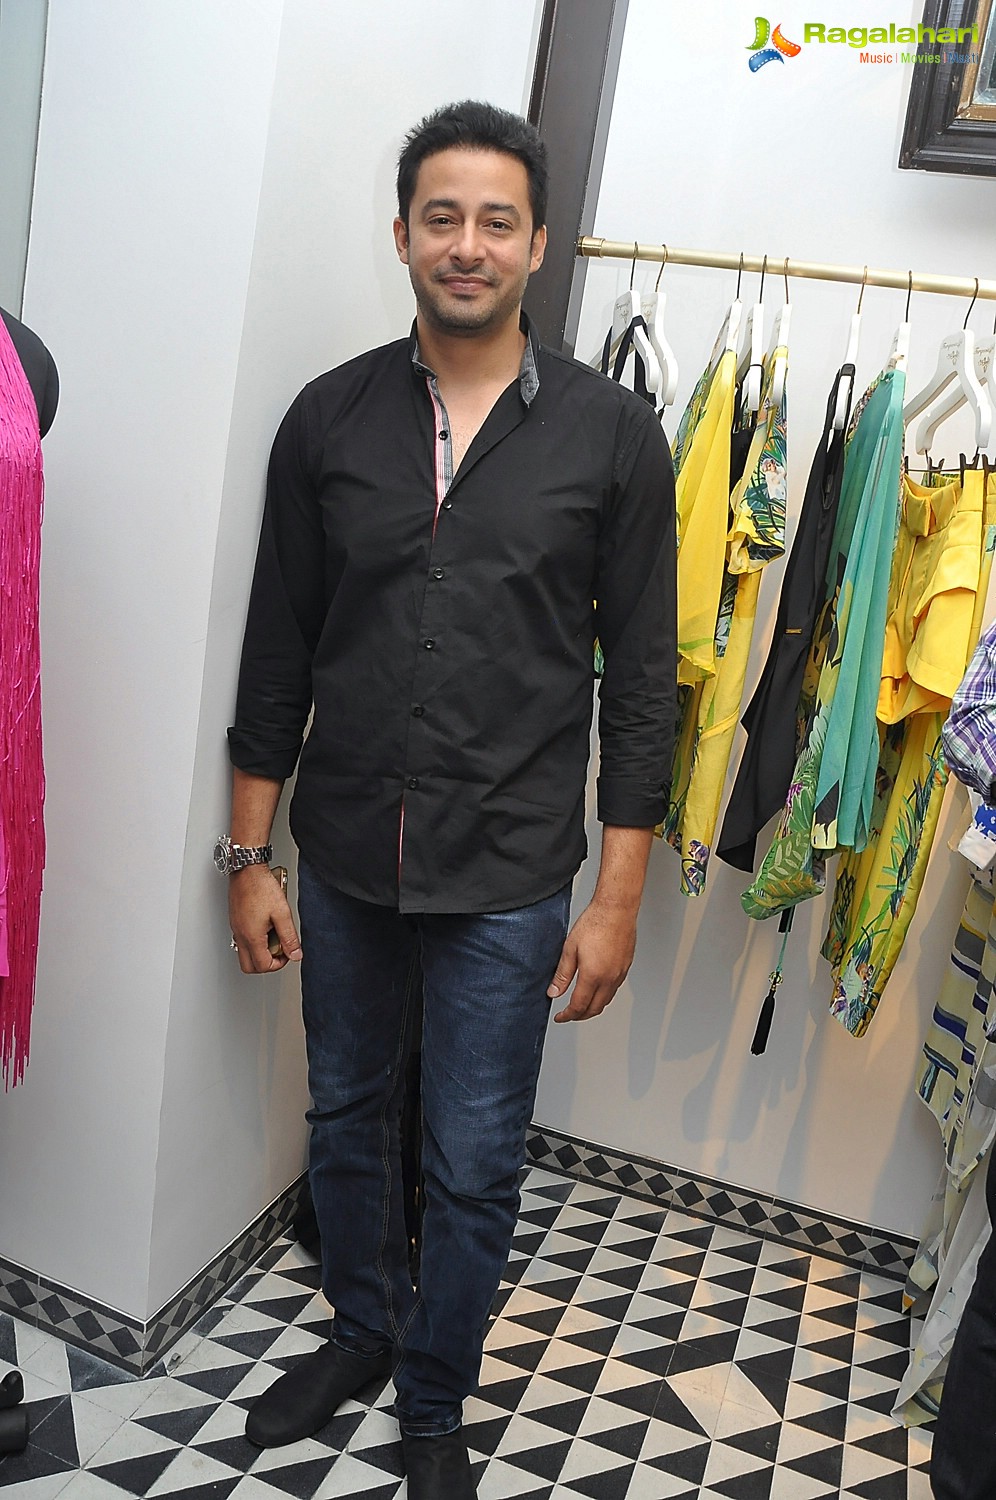 Turquoise and Gold Flagship Store Launch, Mumbai